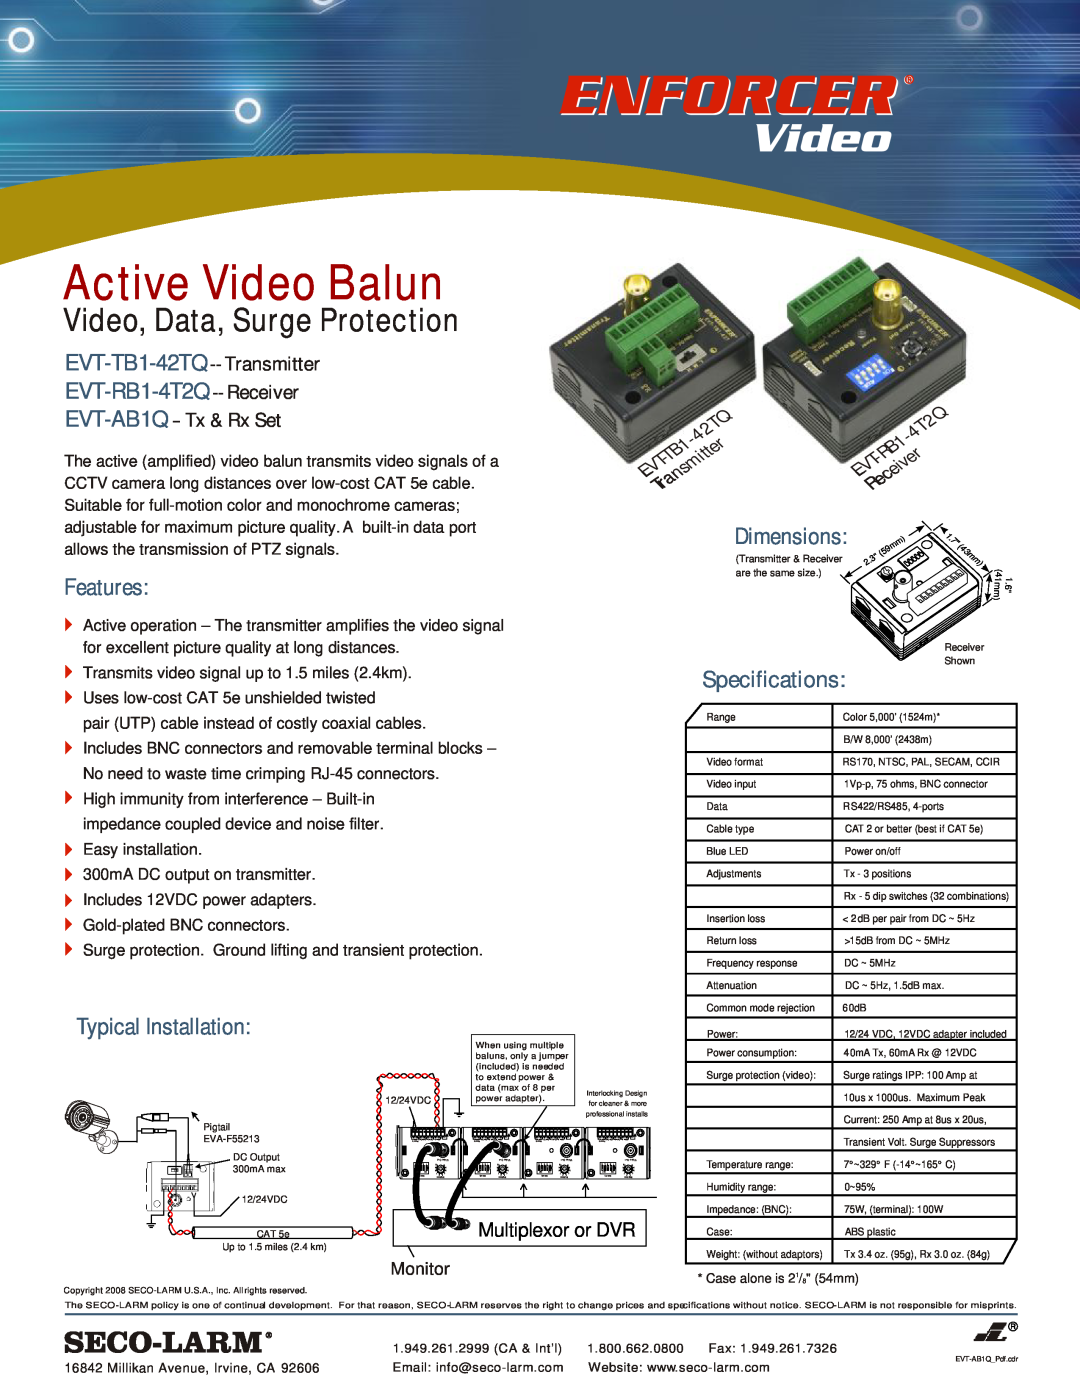 SECO-LARM USA specifications EVT-RB1-4T2Q -- Receiver, Features, Typical Installation, Specifications, Dimensions 